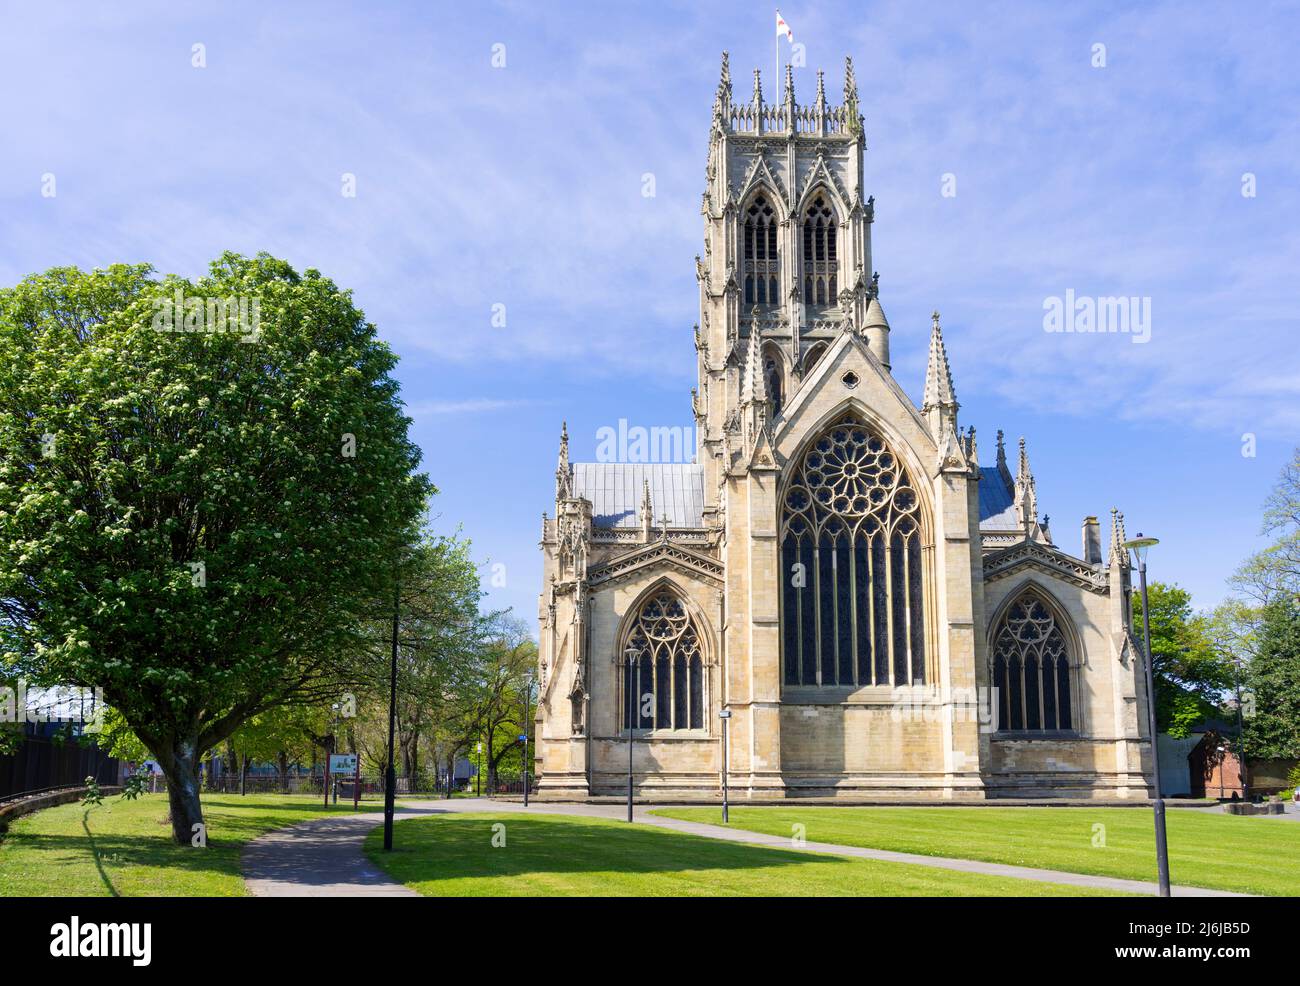 The Minster Church of St George or Doncaster Minster Doncaster South Yorkshire Inghilterra uk gb Europe Foto Stock